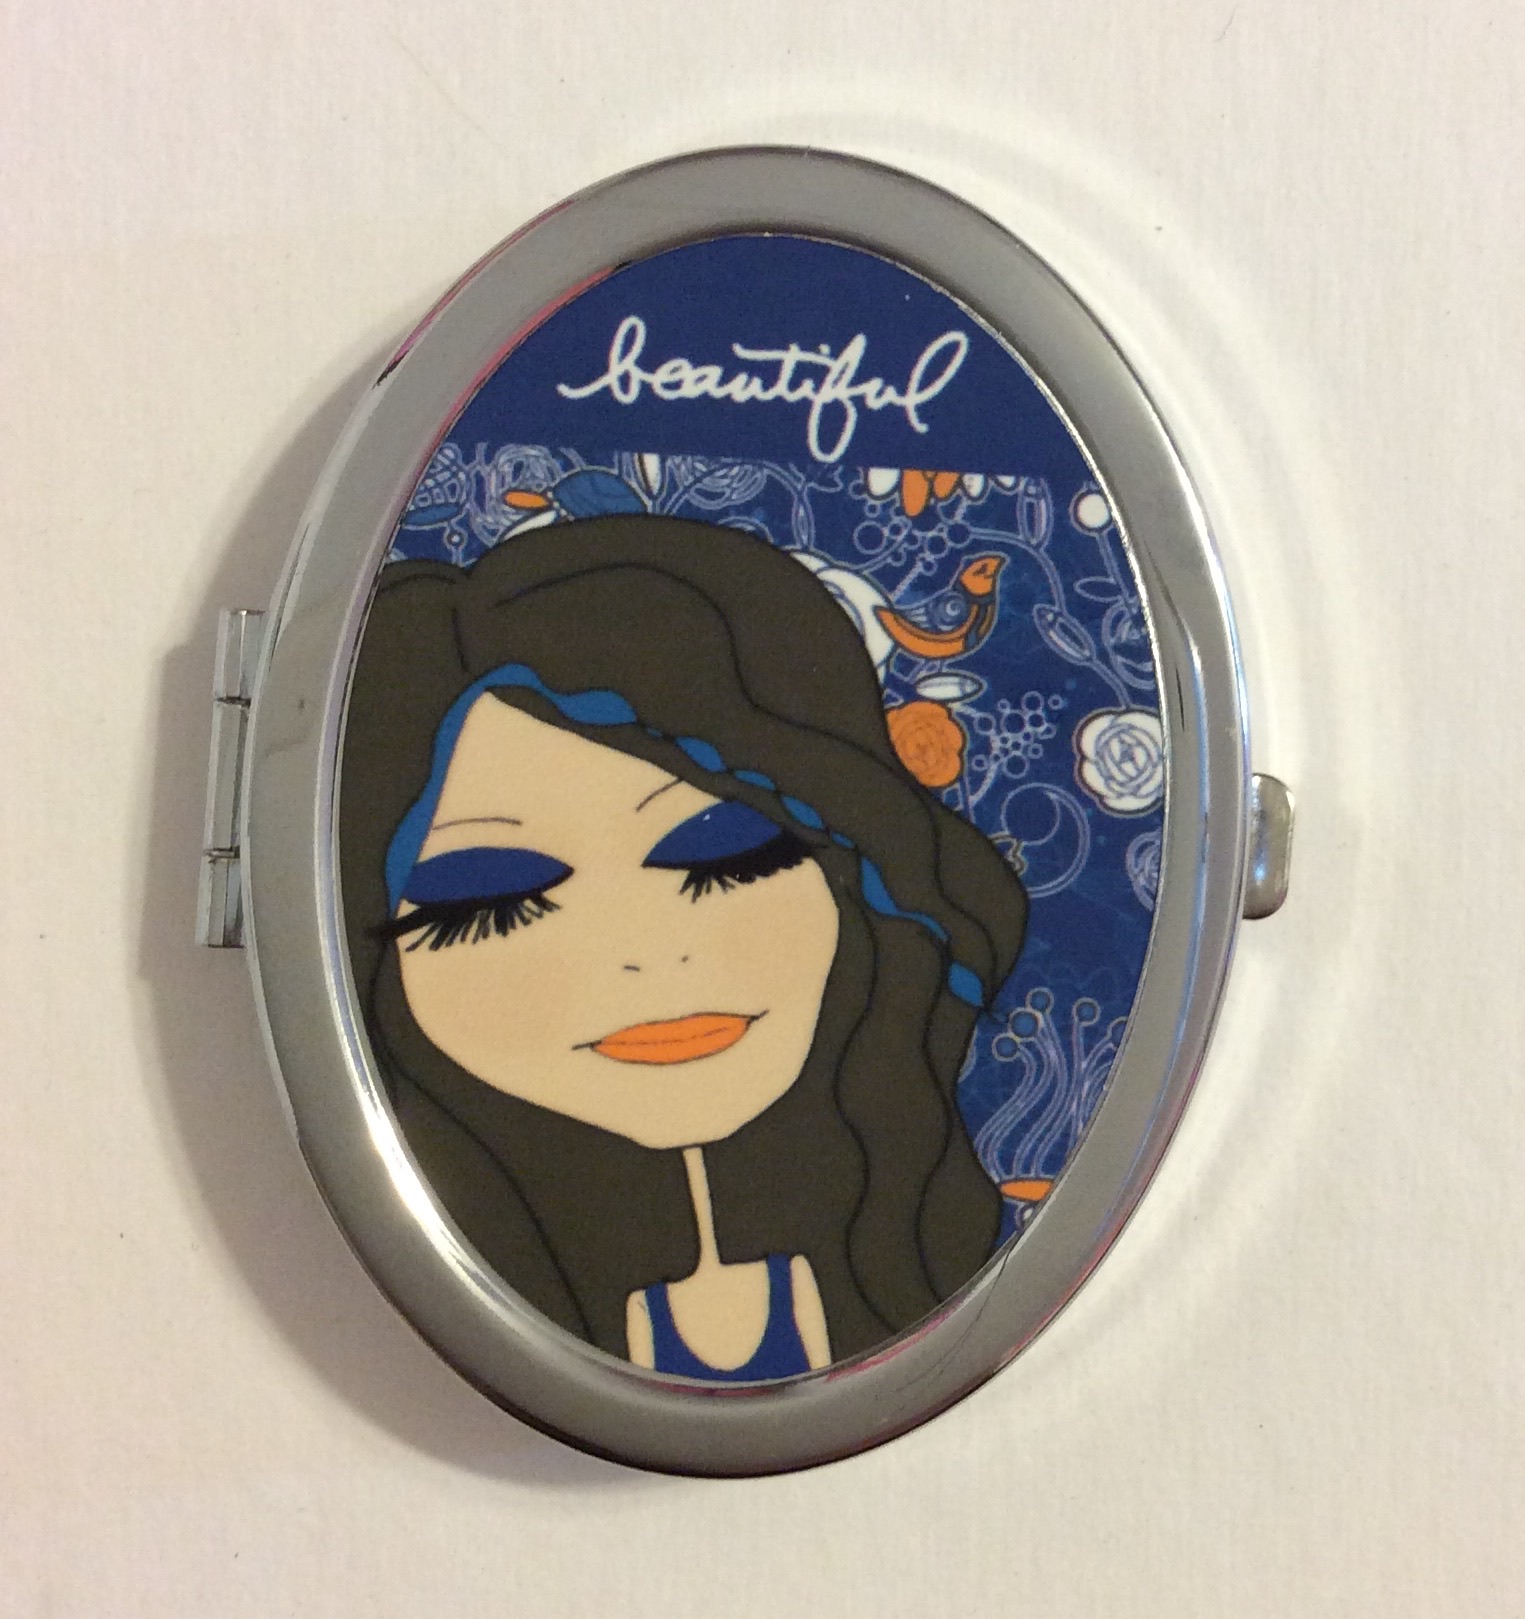 Compact Mirror made with sublimation printing